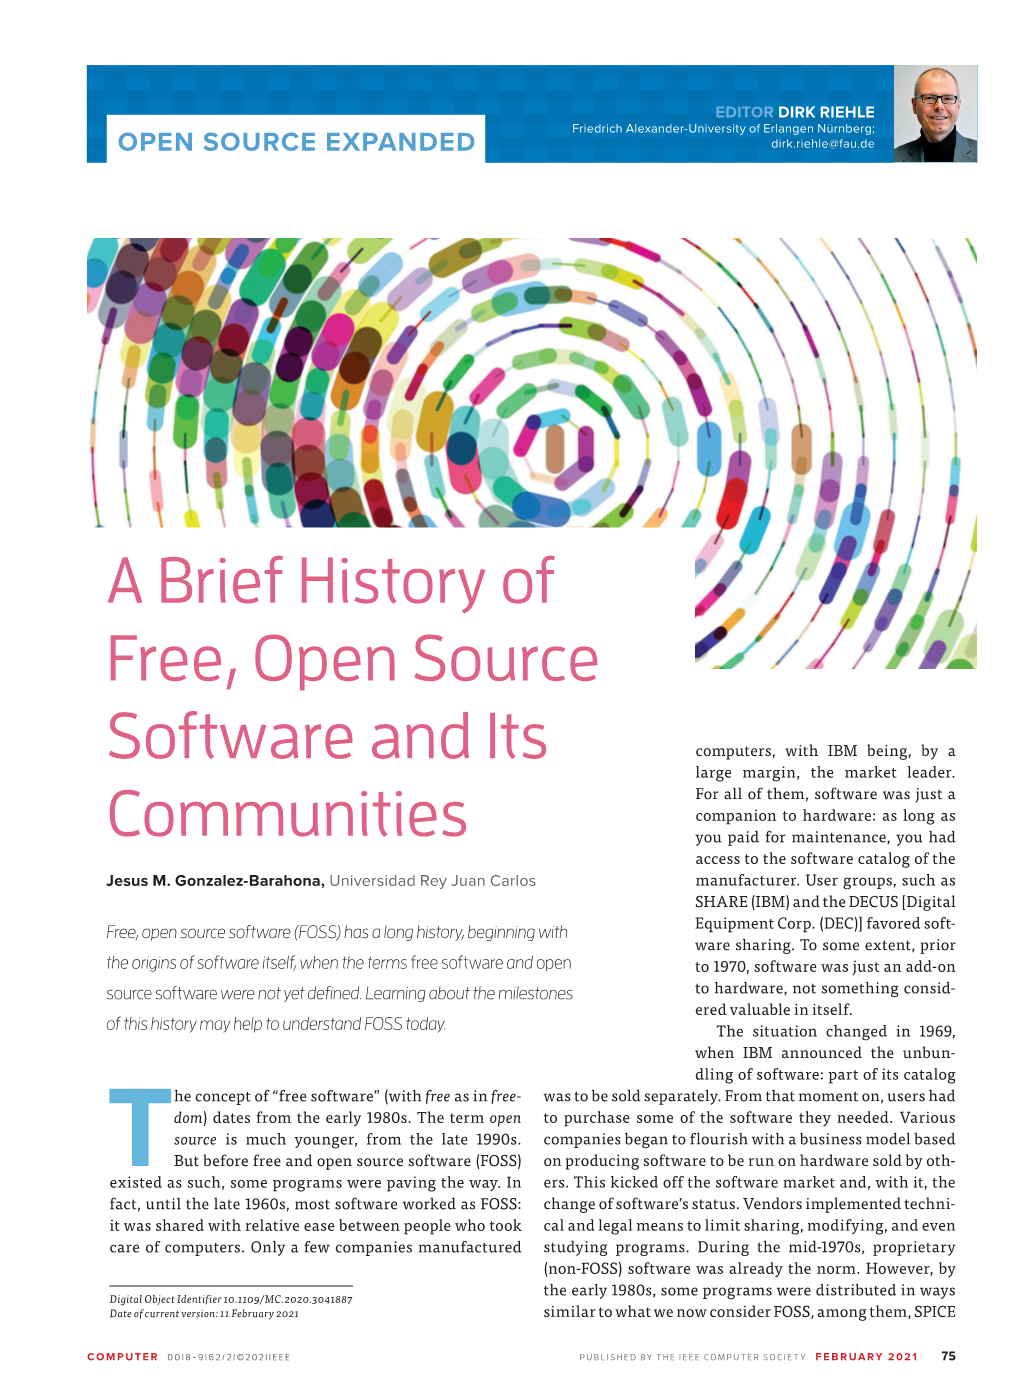 A Brief History of Free, Open Source Software and Its Communities